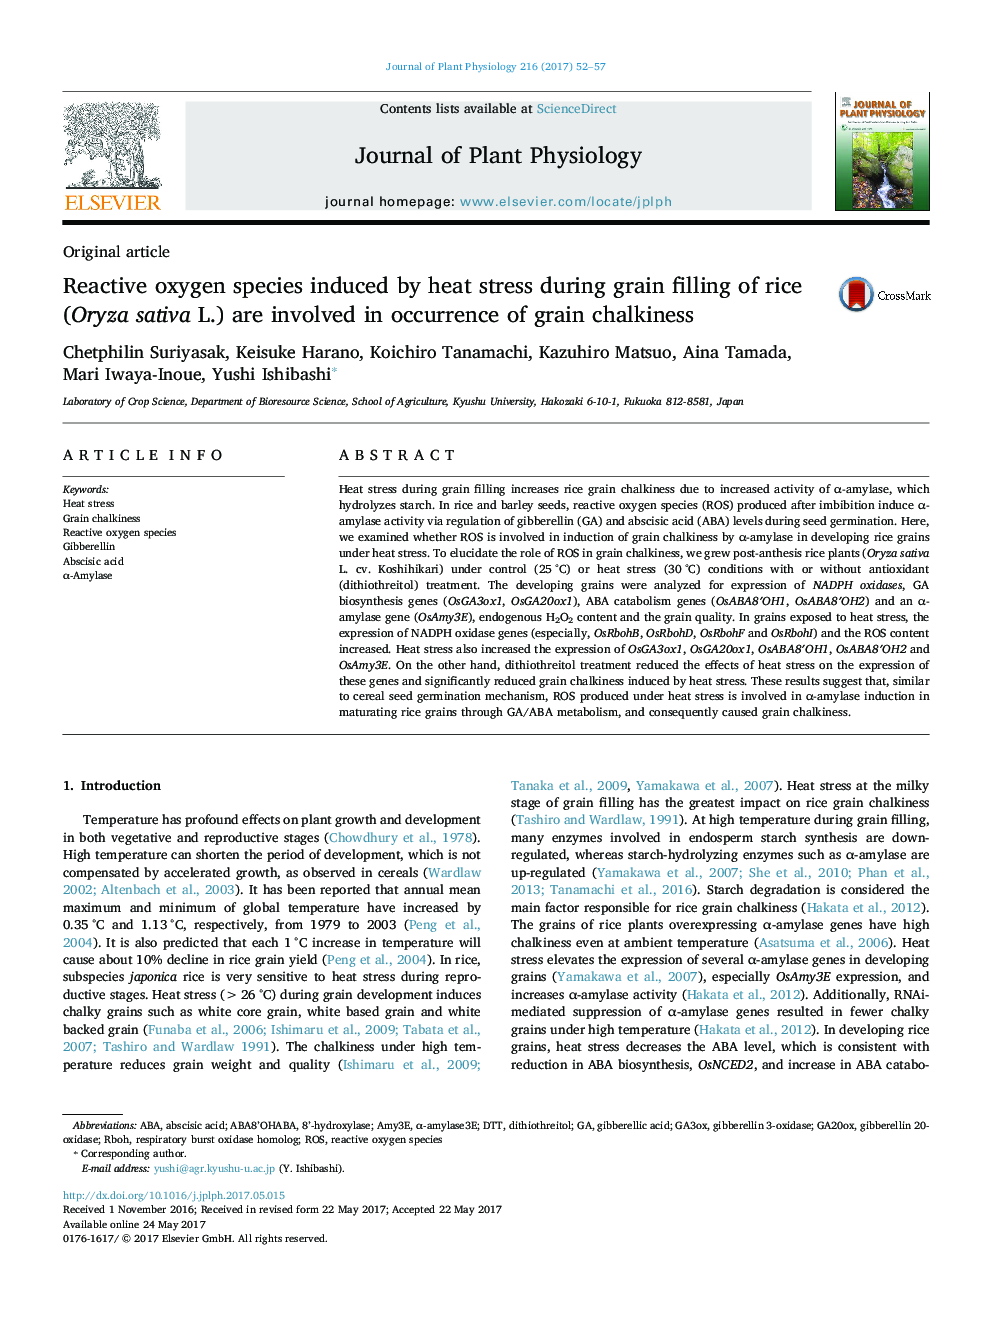 Original articleReactive oxygen species induced by heat stress during grain filling of rice (Oryza sativa L.) are involved in occurrence of grain chalkiness